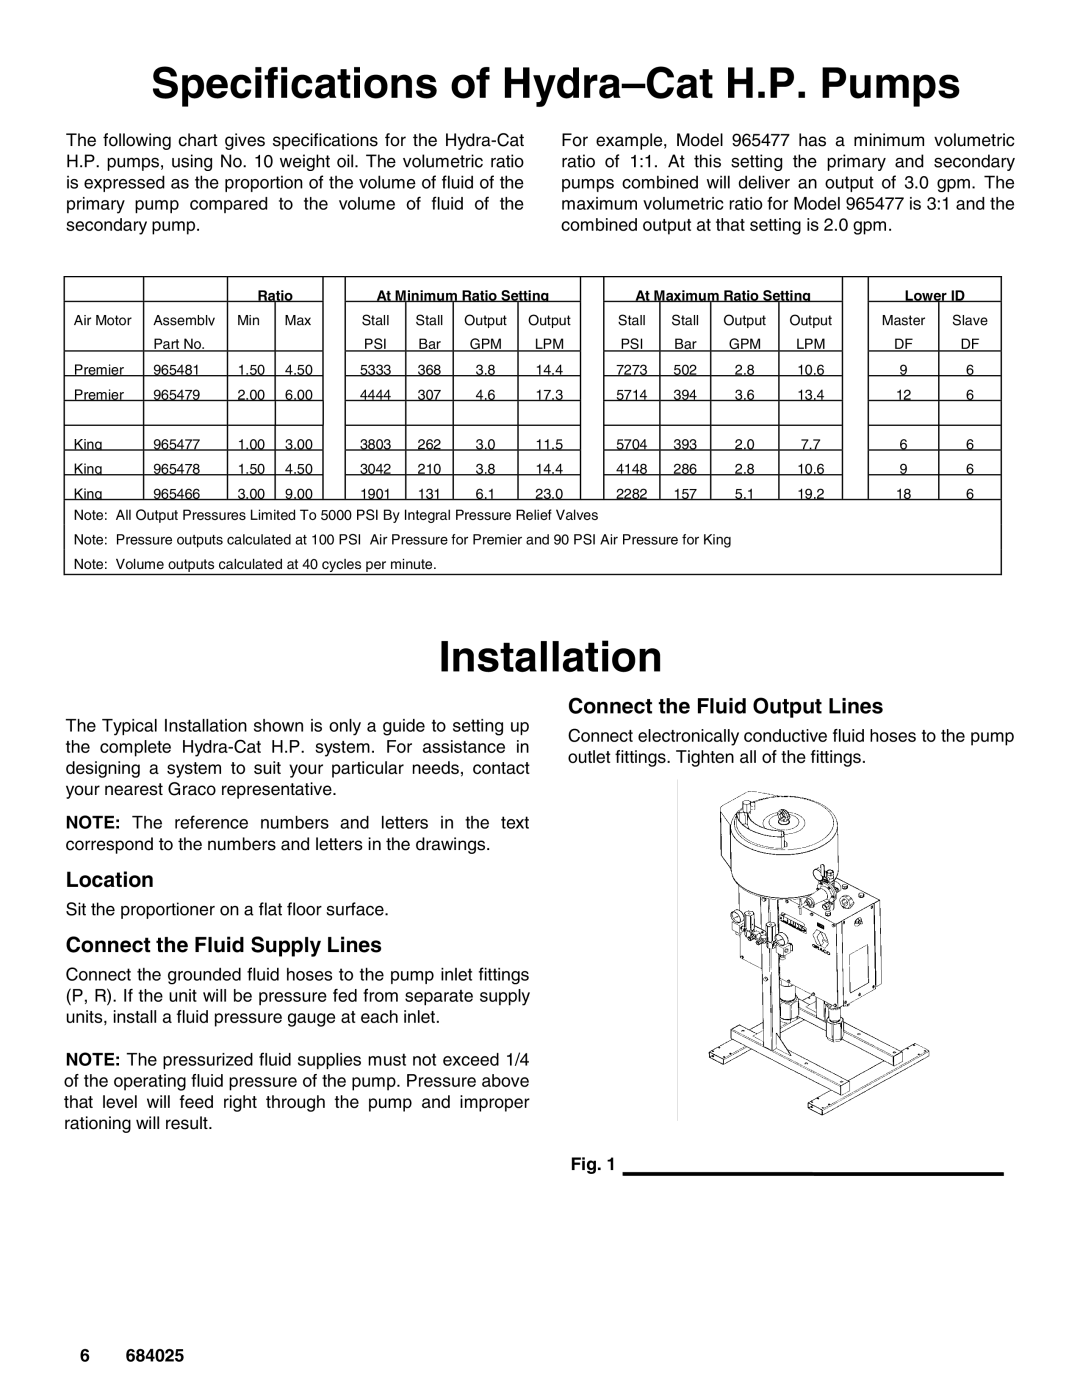 Graco 965478, 965477, 965481 Specifications of Hydra-CatH.P. Pumps, Installation, Location, Connect the Fluid Supply Lines 